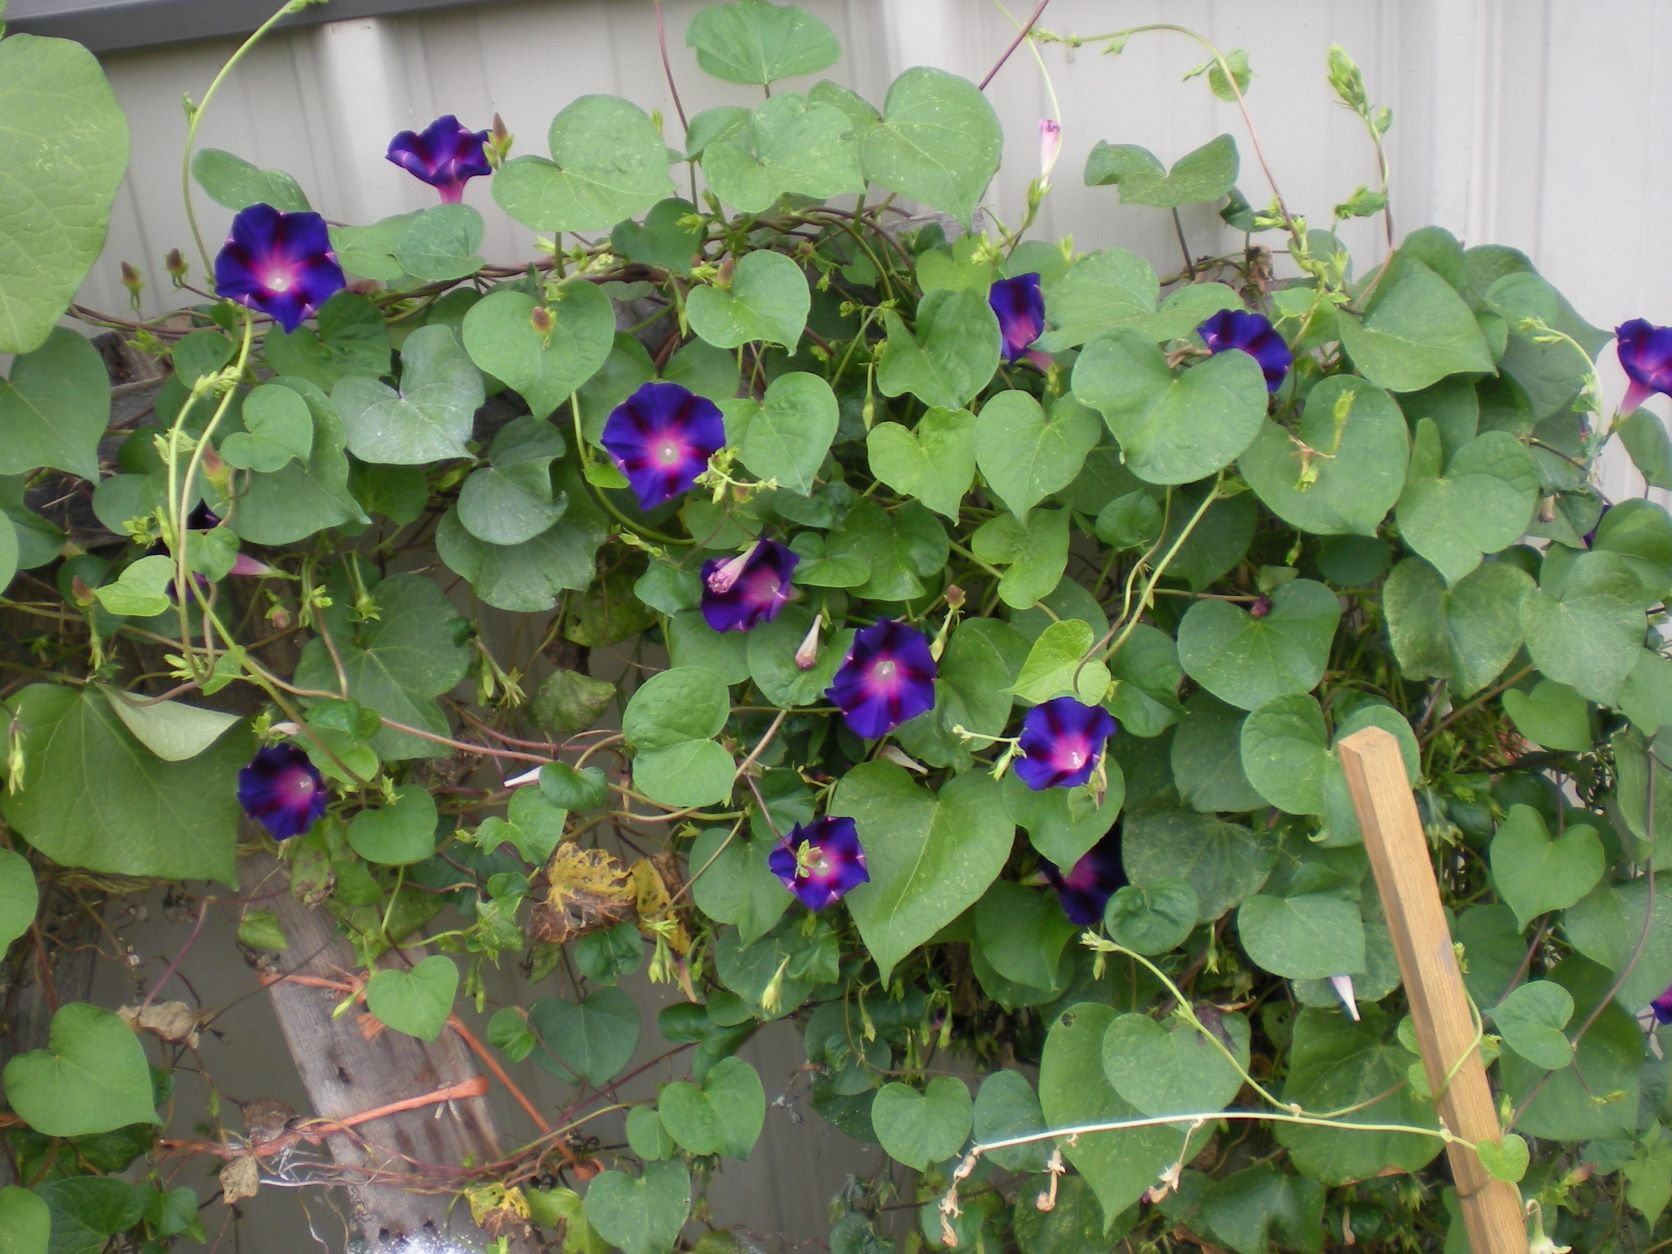 purple morning glory flowers outside the feed store's door